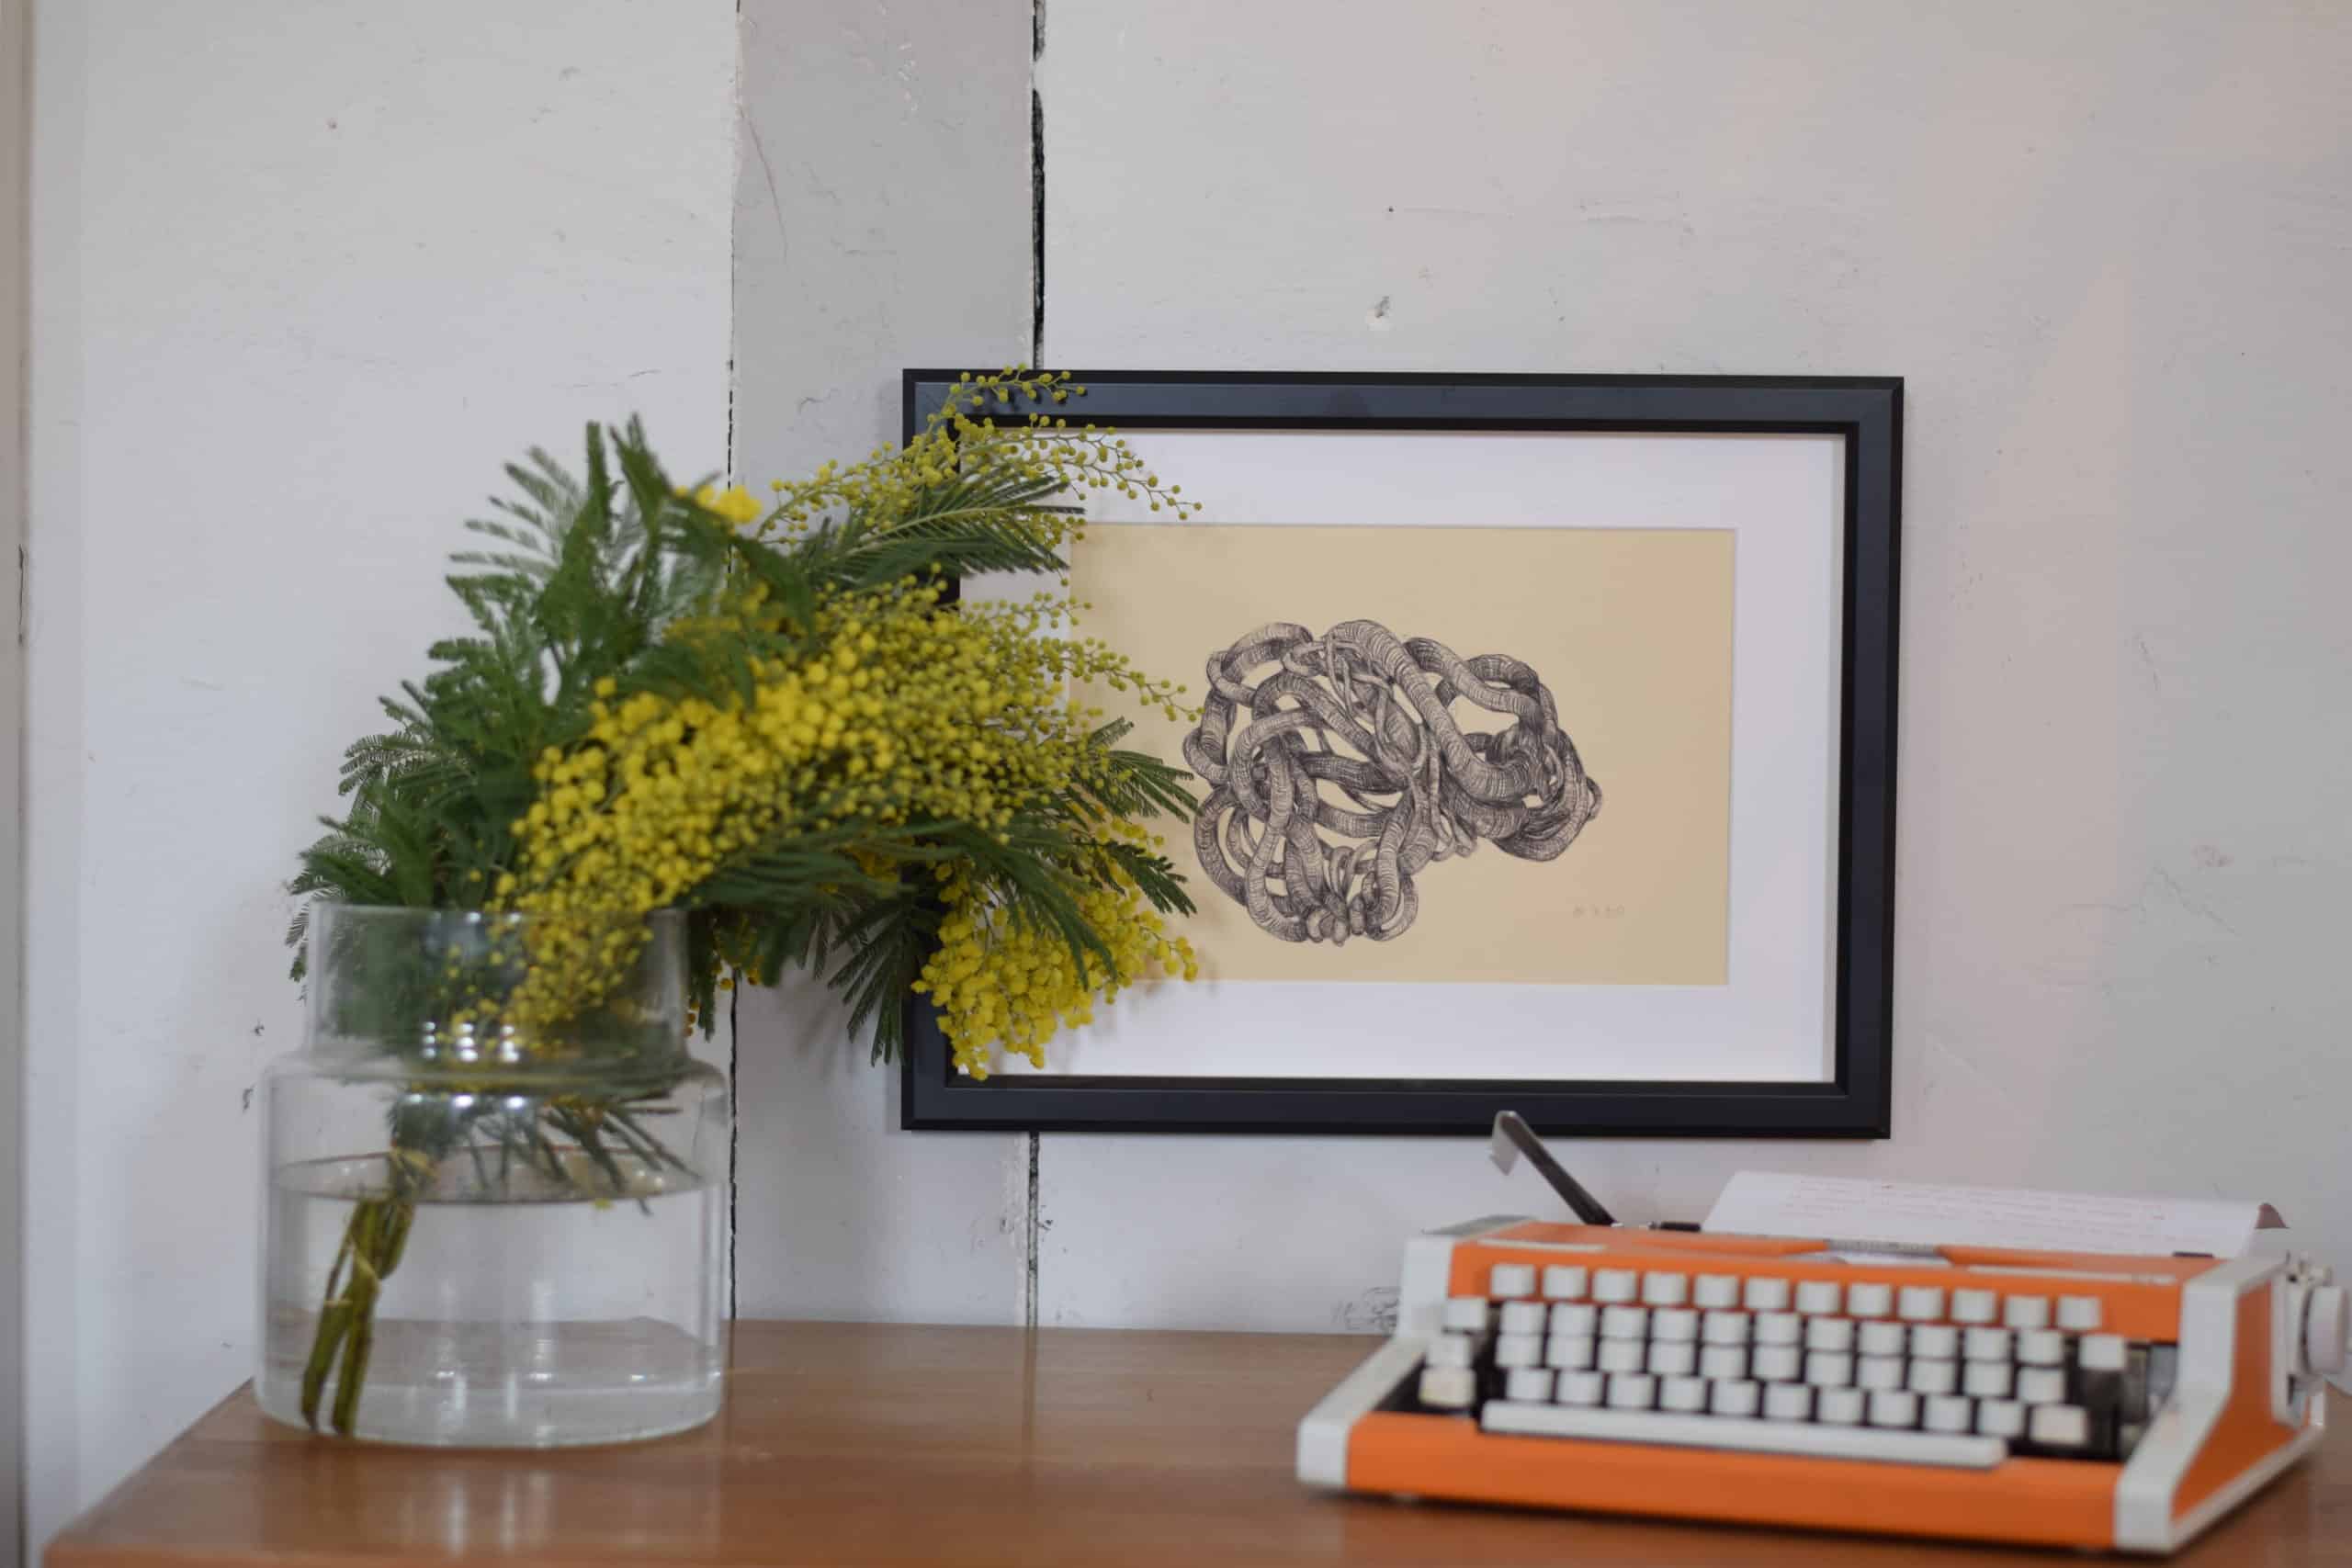 Drawing of a sculpture with flower vase and old typing machine by Aude Franjou